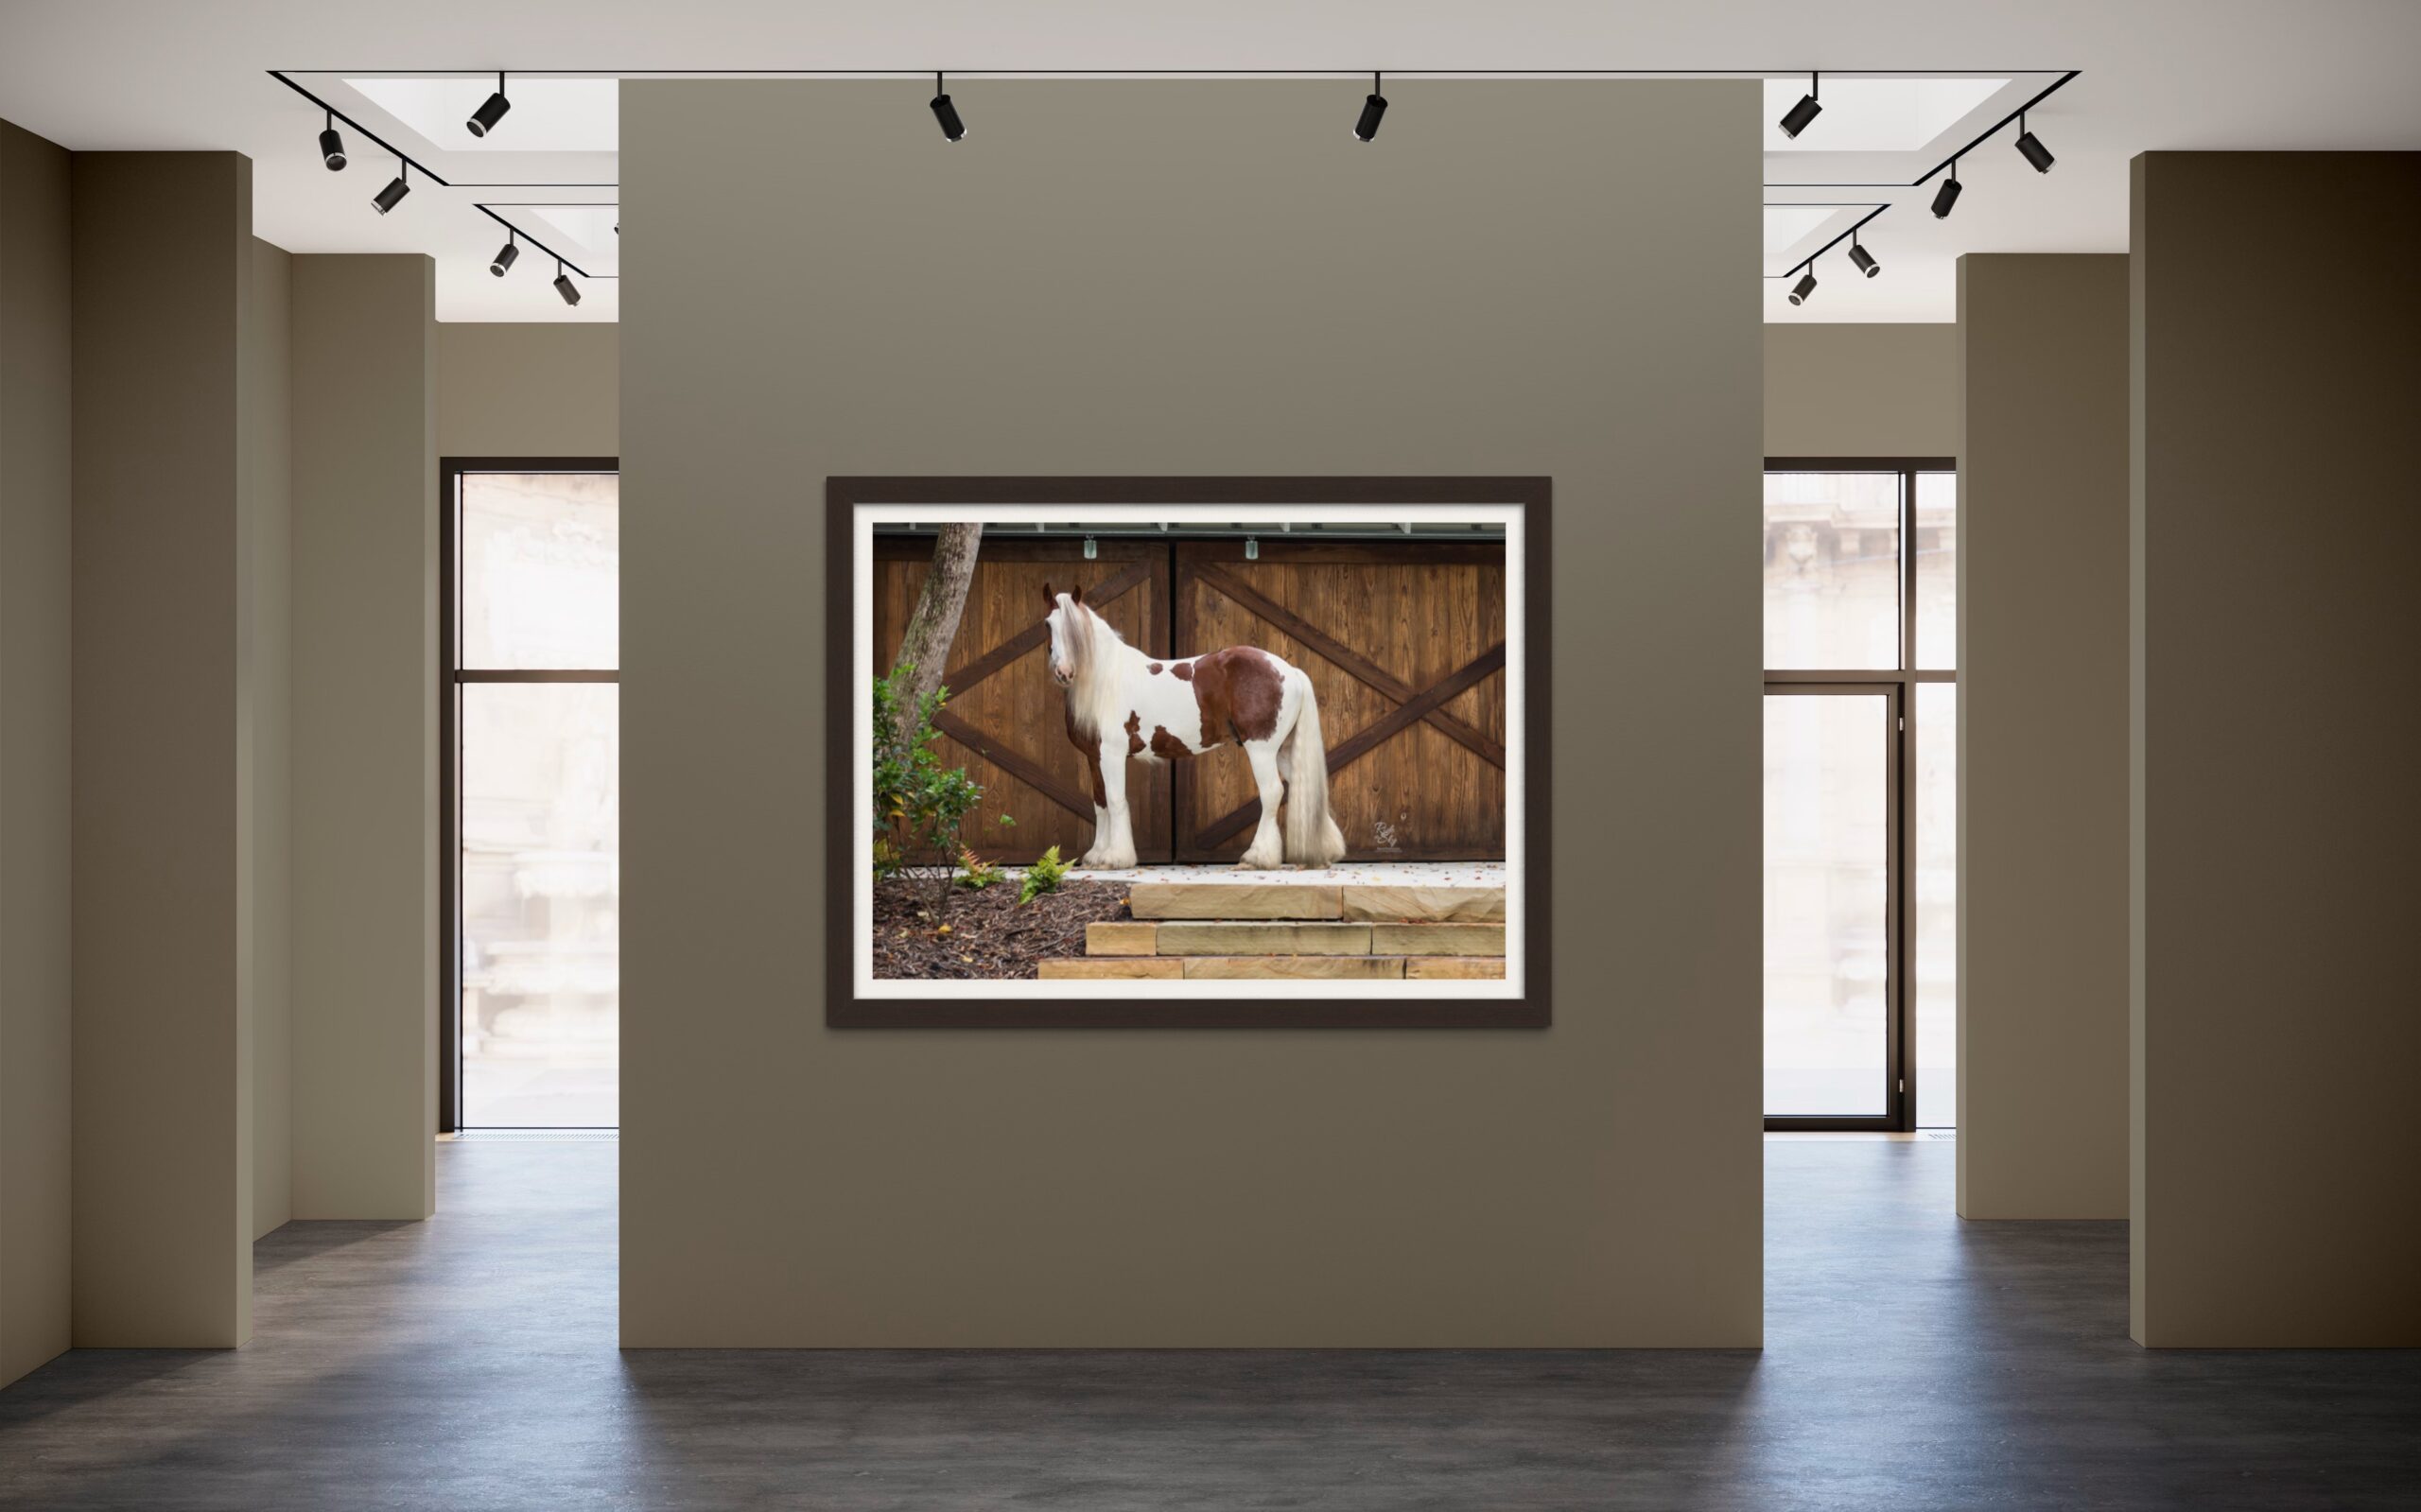 Portrait of Gypsy Vanner Horse as a framed Print on Wall.